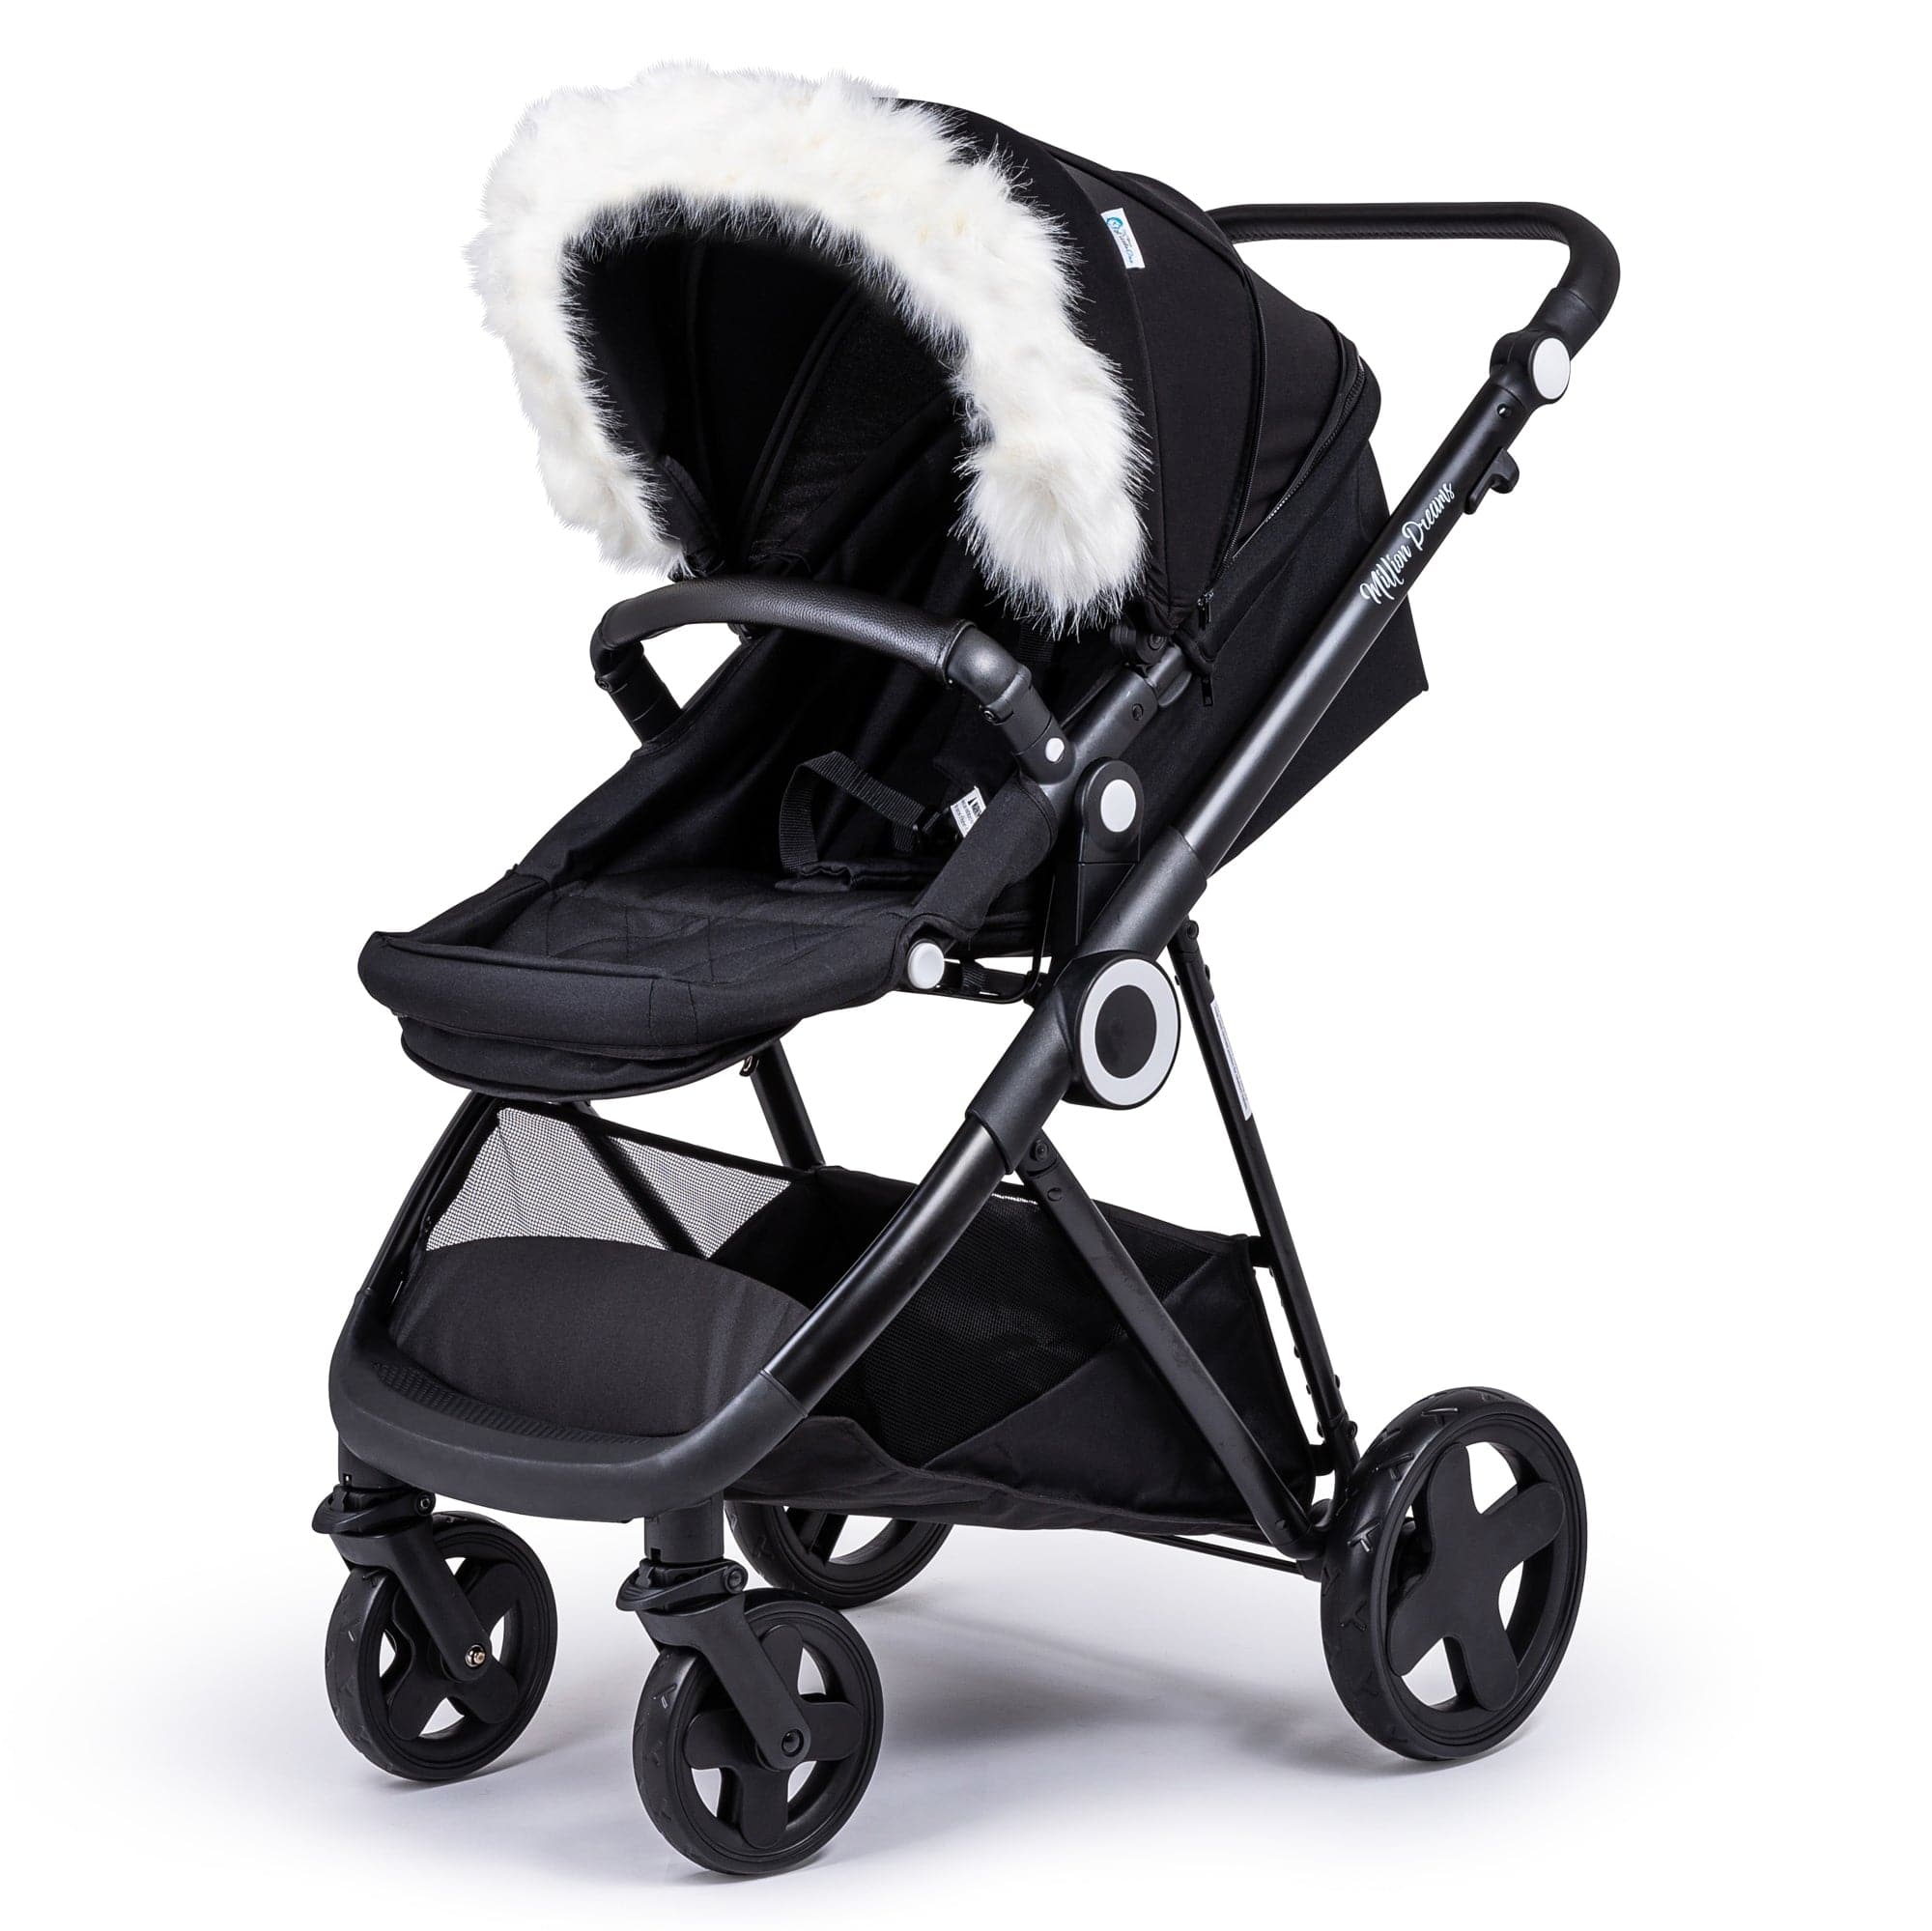 Pram Fur Hood Trim Attachment For Pushchair Compatible with Orbit Baby - White / Fits All Models | For Your Little One